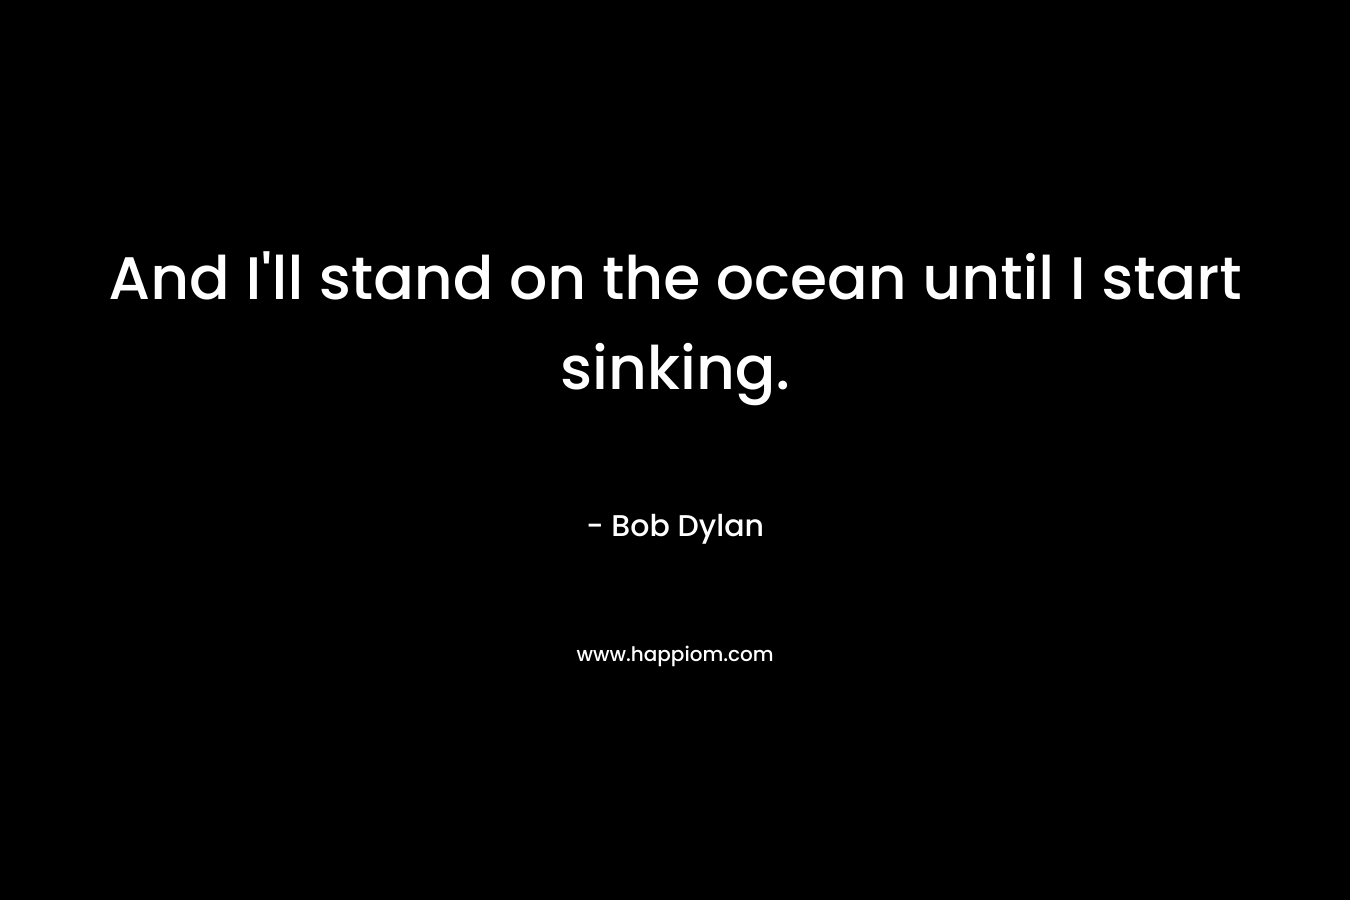 And I’ll stand on the ocean until I start sinking. – Bob Dylan